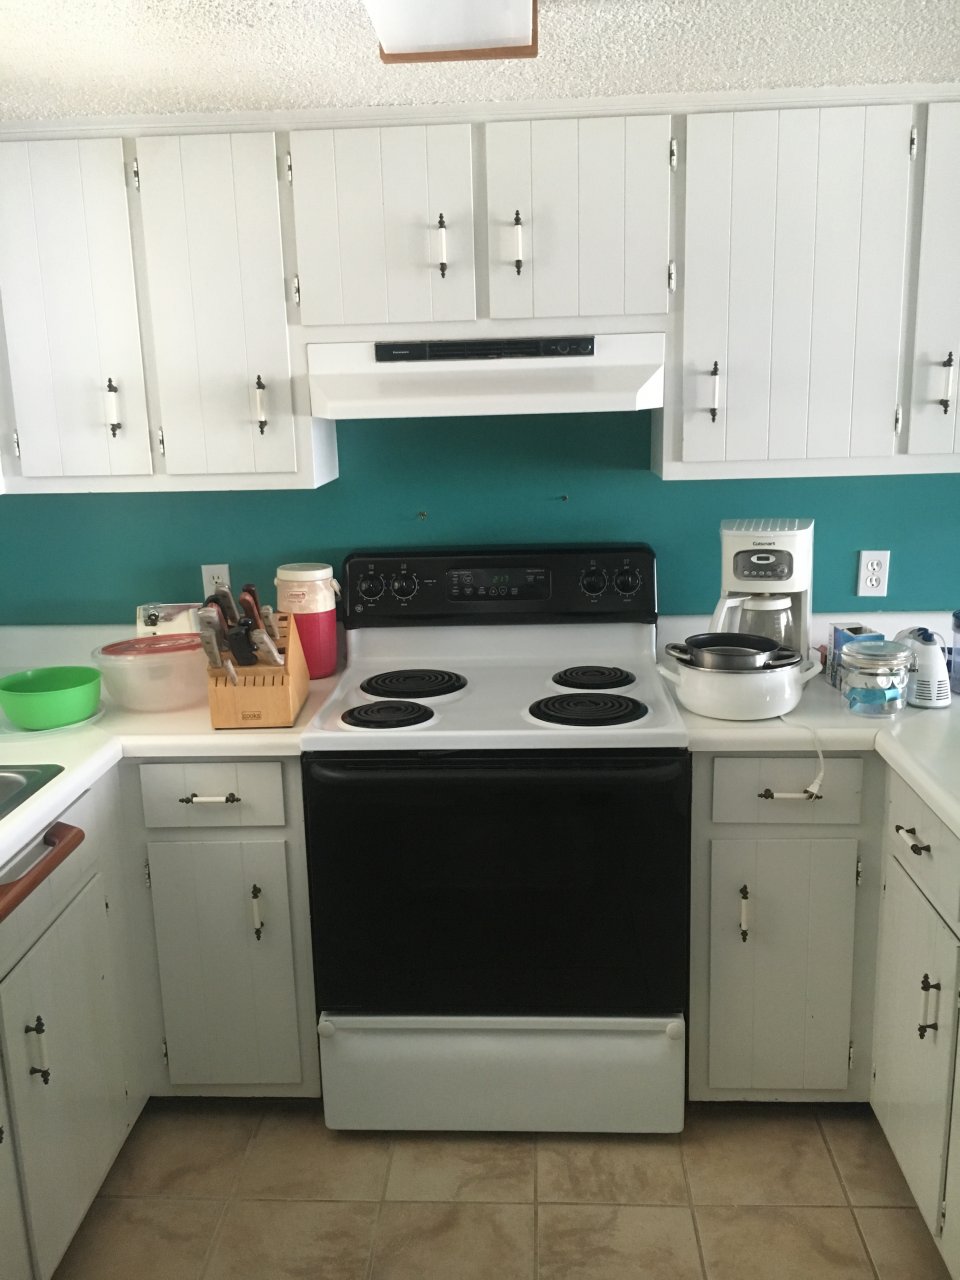 Before picture of beach house kitchen old cabinets and appliances